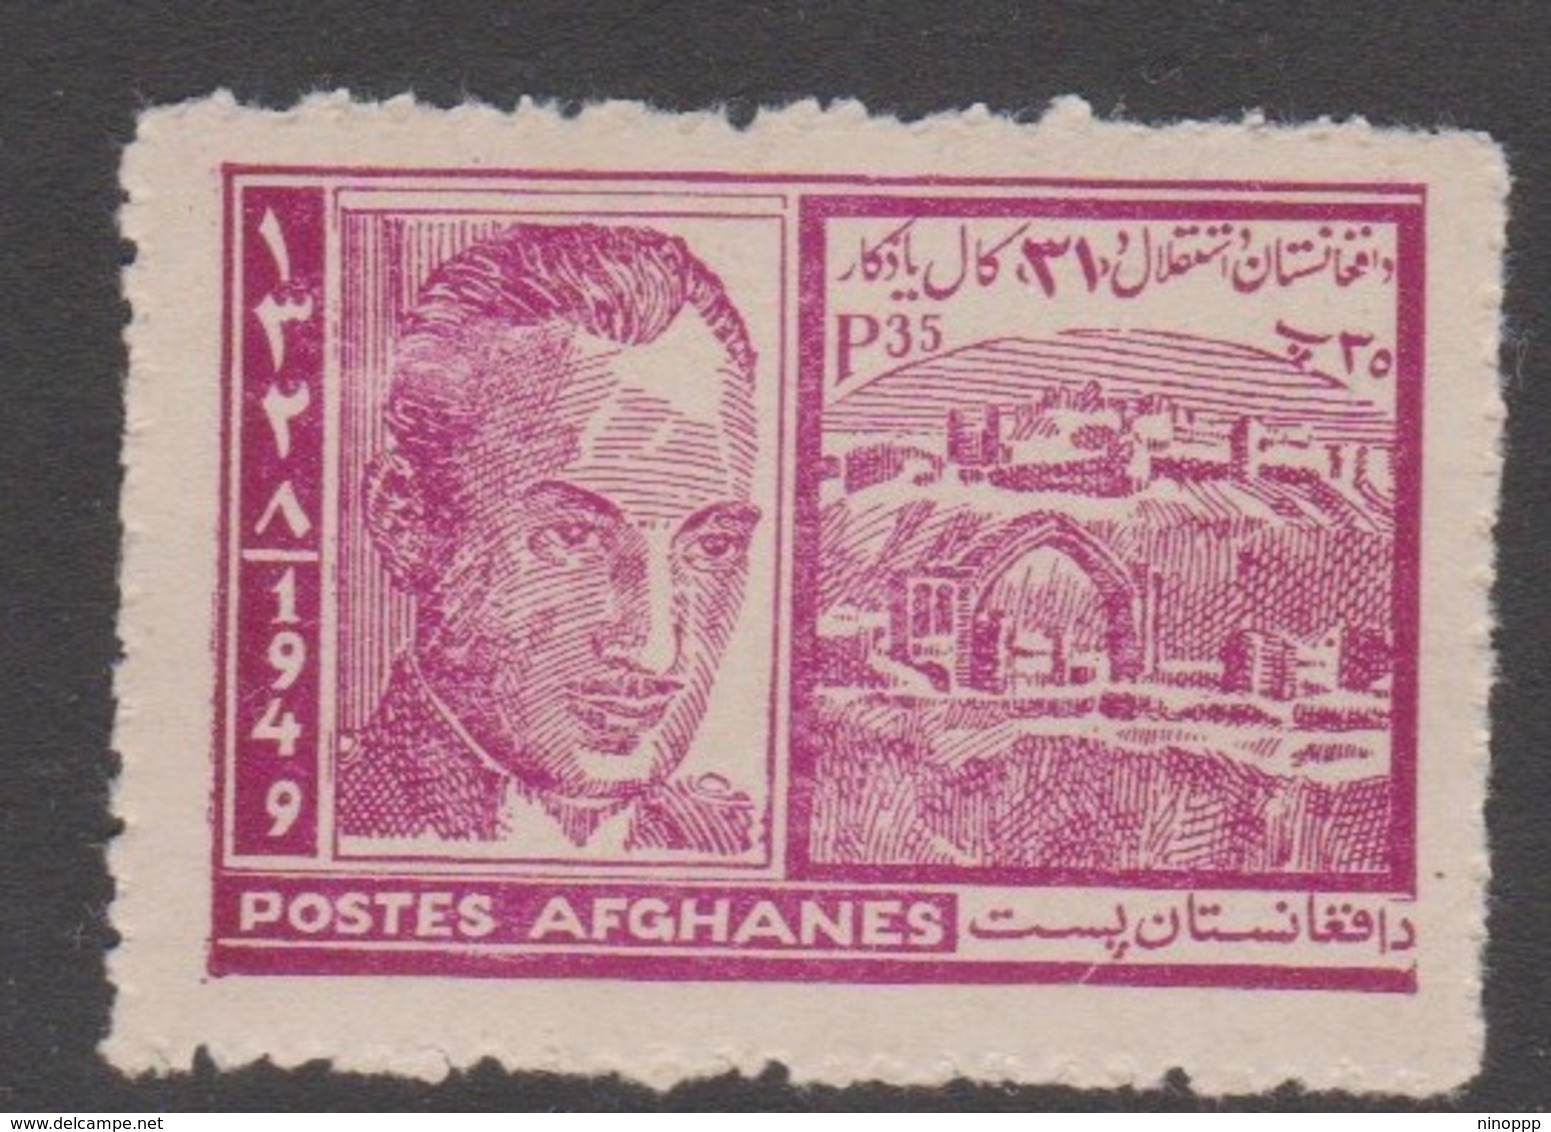 Afghanistan SG 310 1949 31st Independence Day  35p Mauve,MNH - Afghanistan